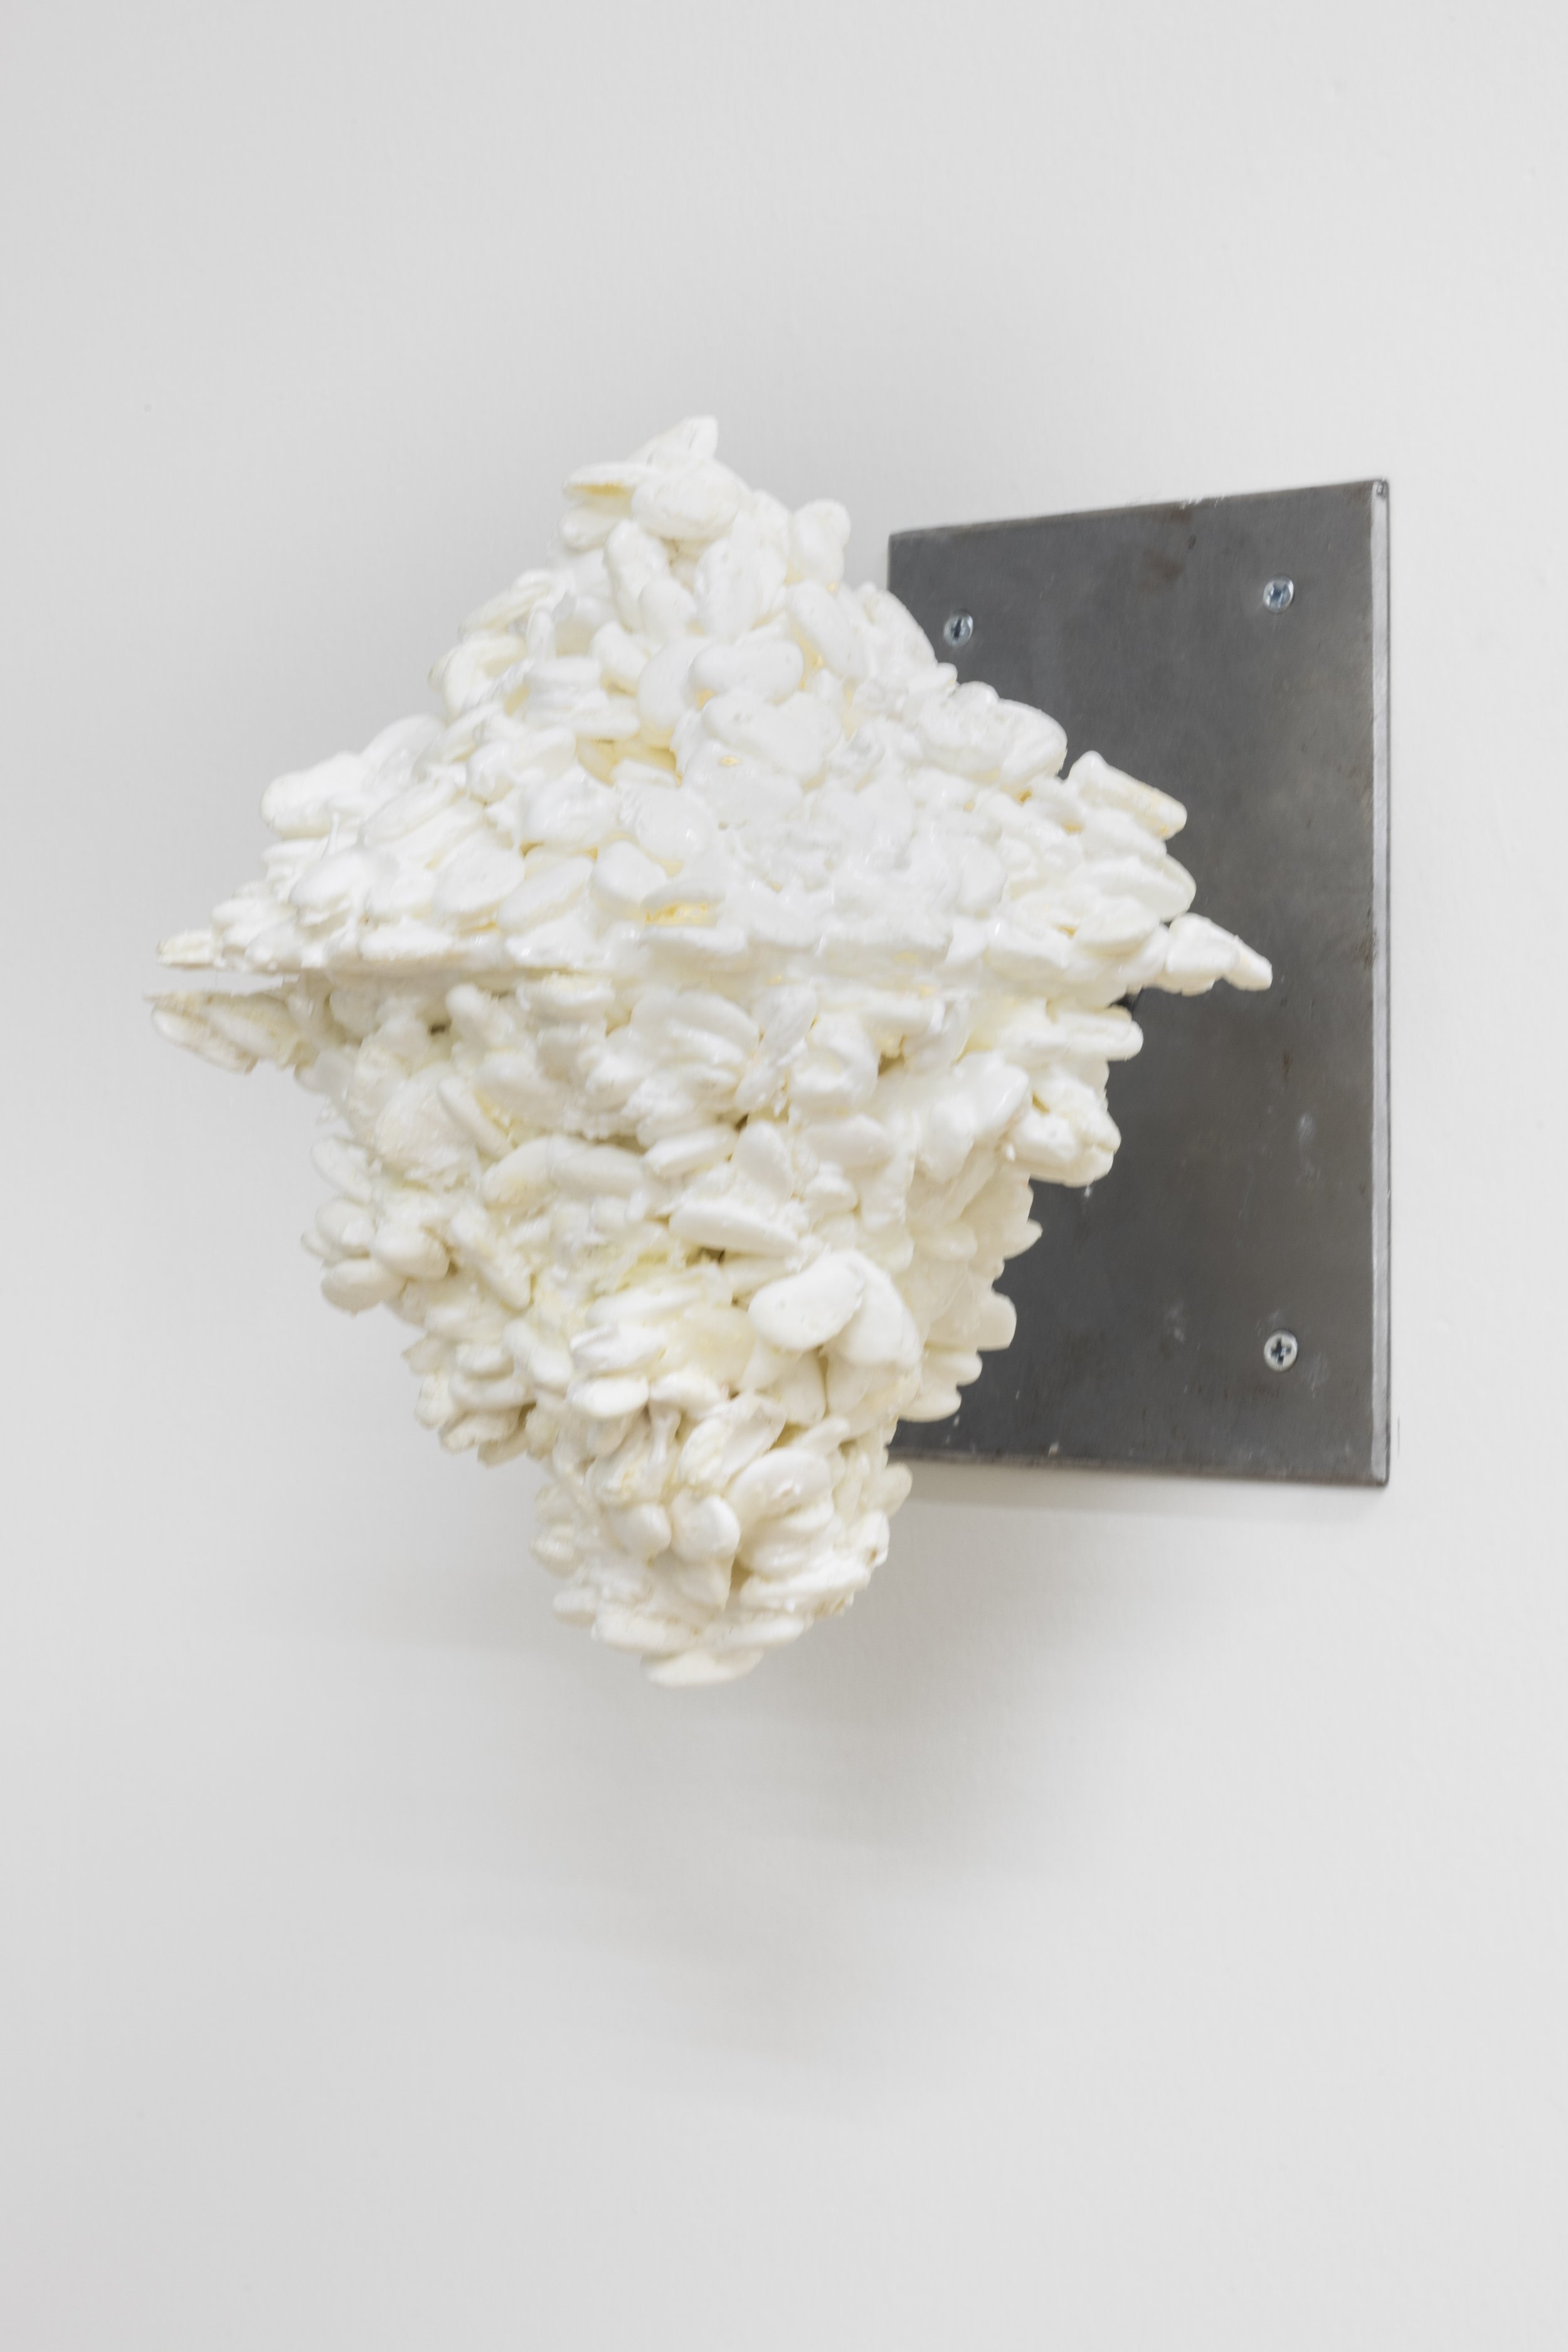   Lima Bean Pile , 2021   Cast resin  10 x 9 x 11 inches 